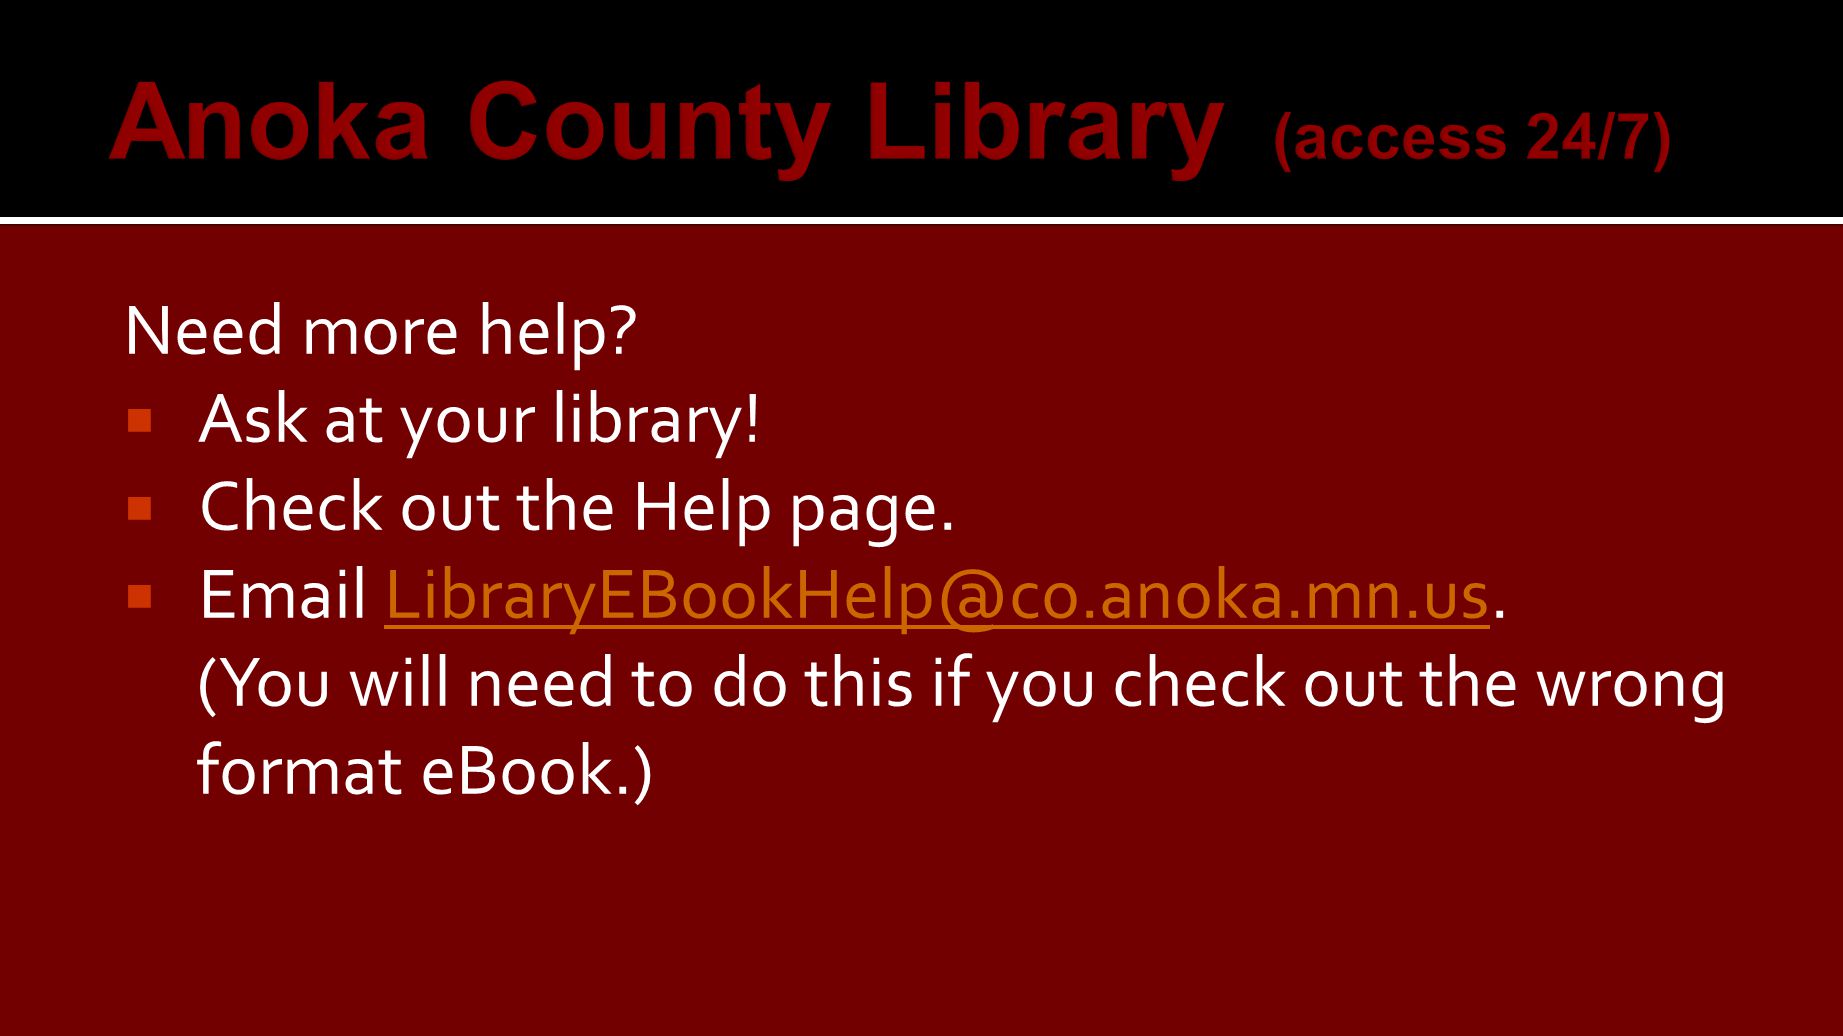 Need more help.  Ask at your library.  Check out the Help page.